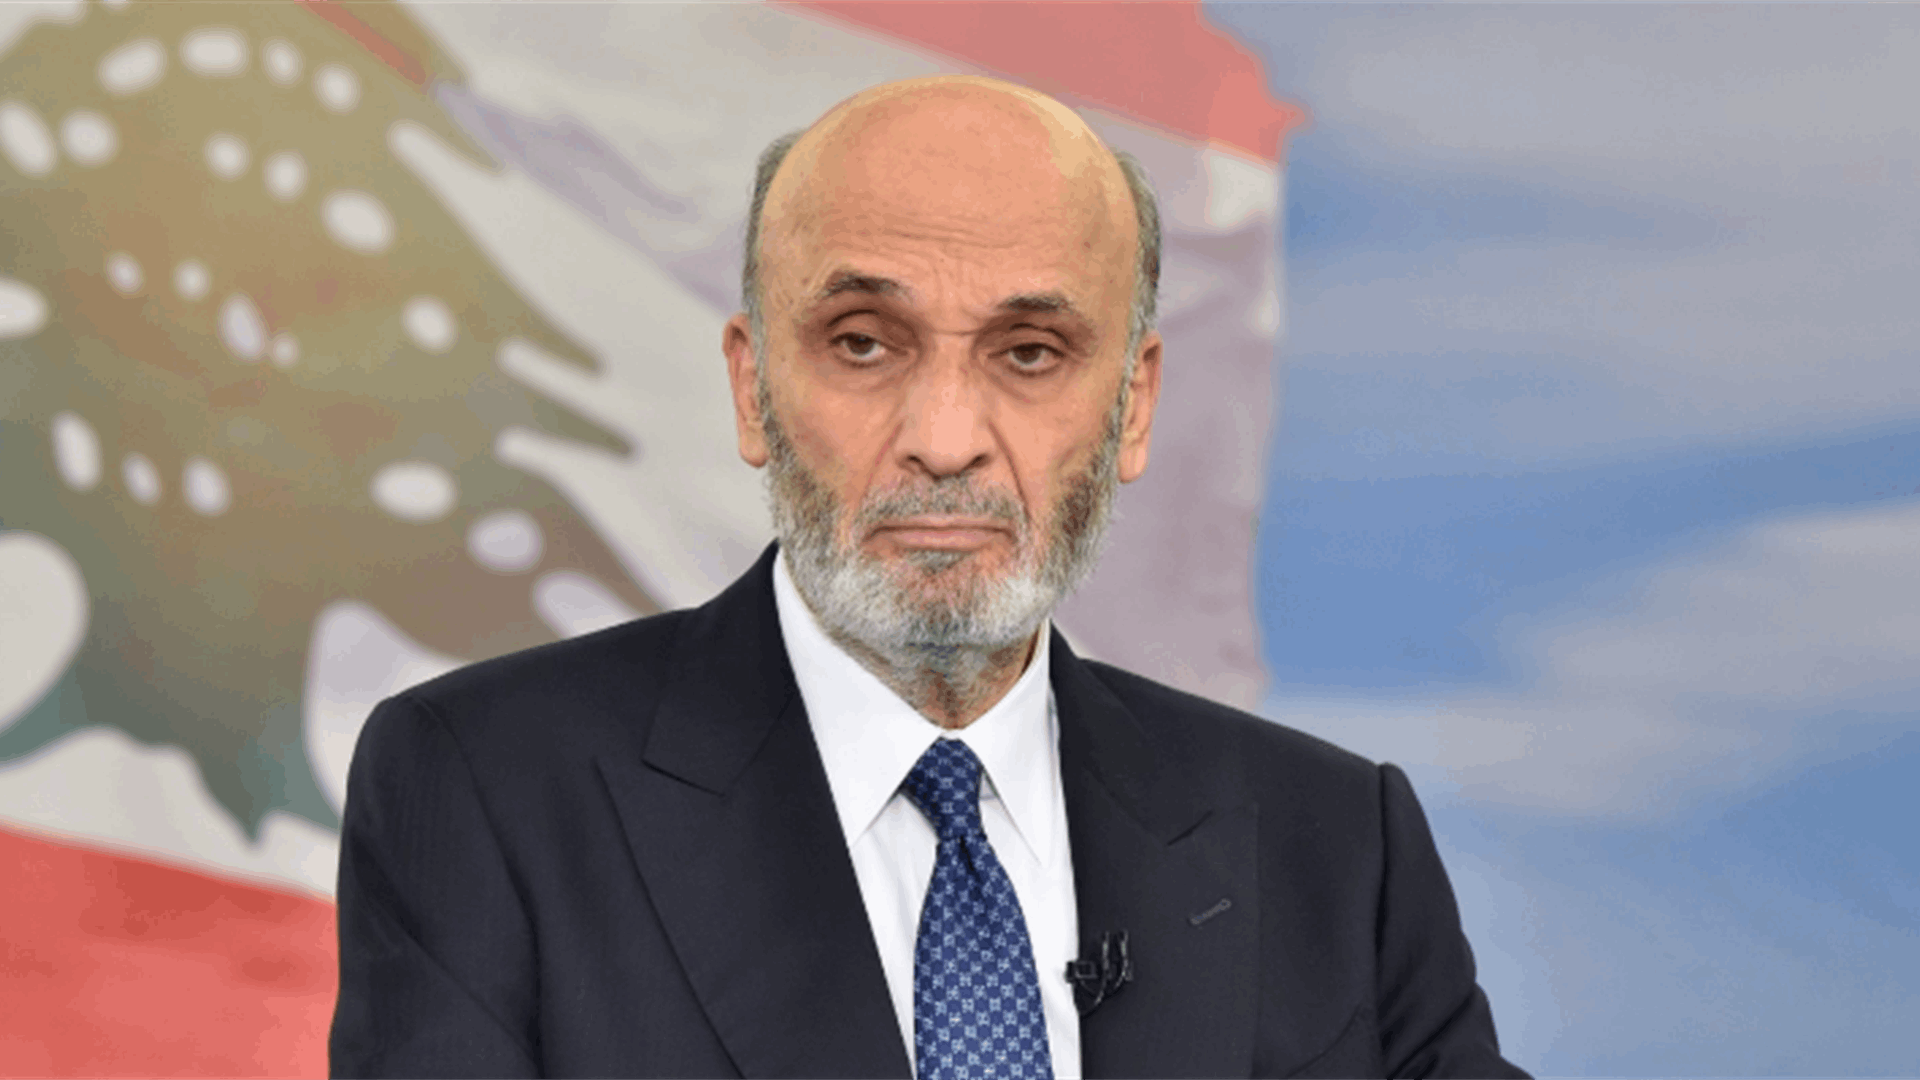 Postponed power play: Geagea on the delay of presidential elections